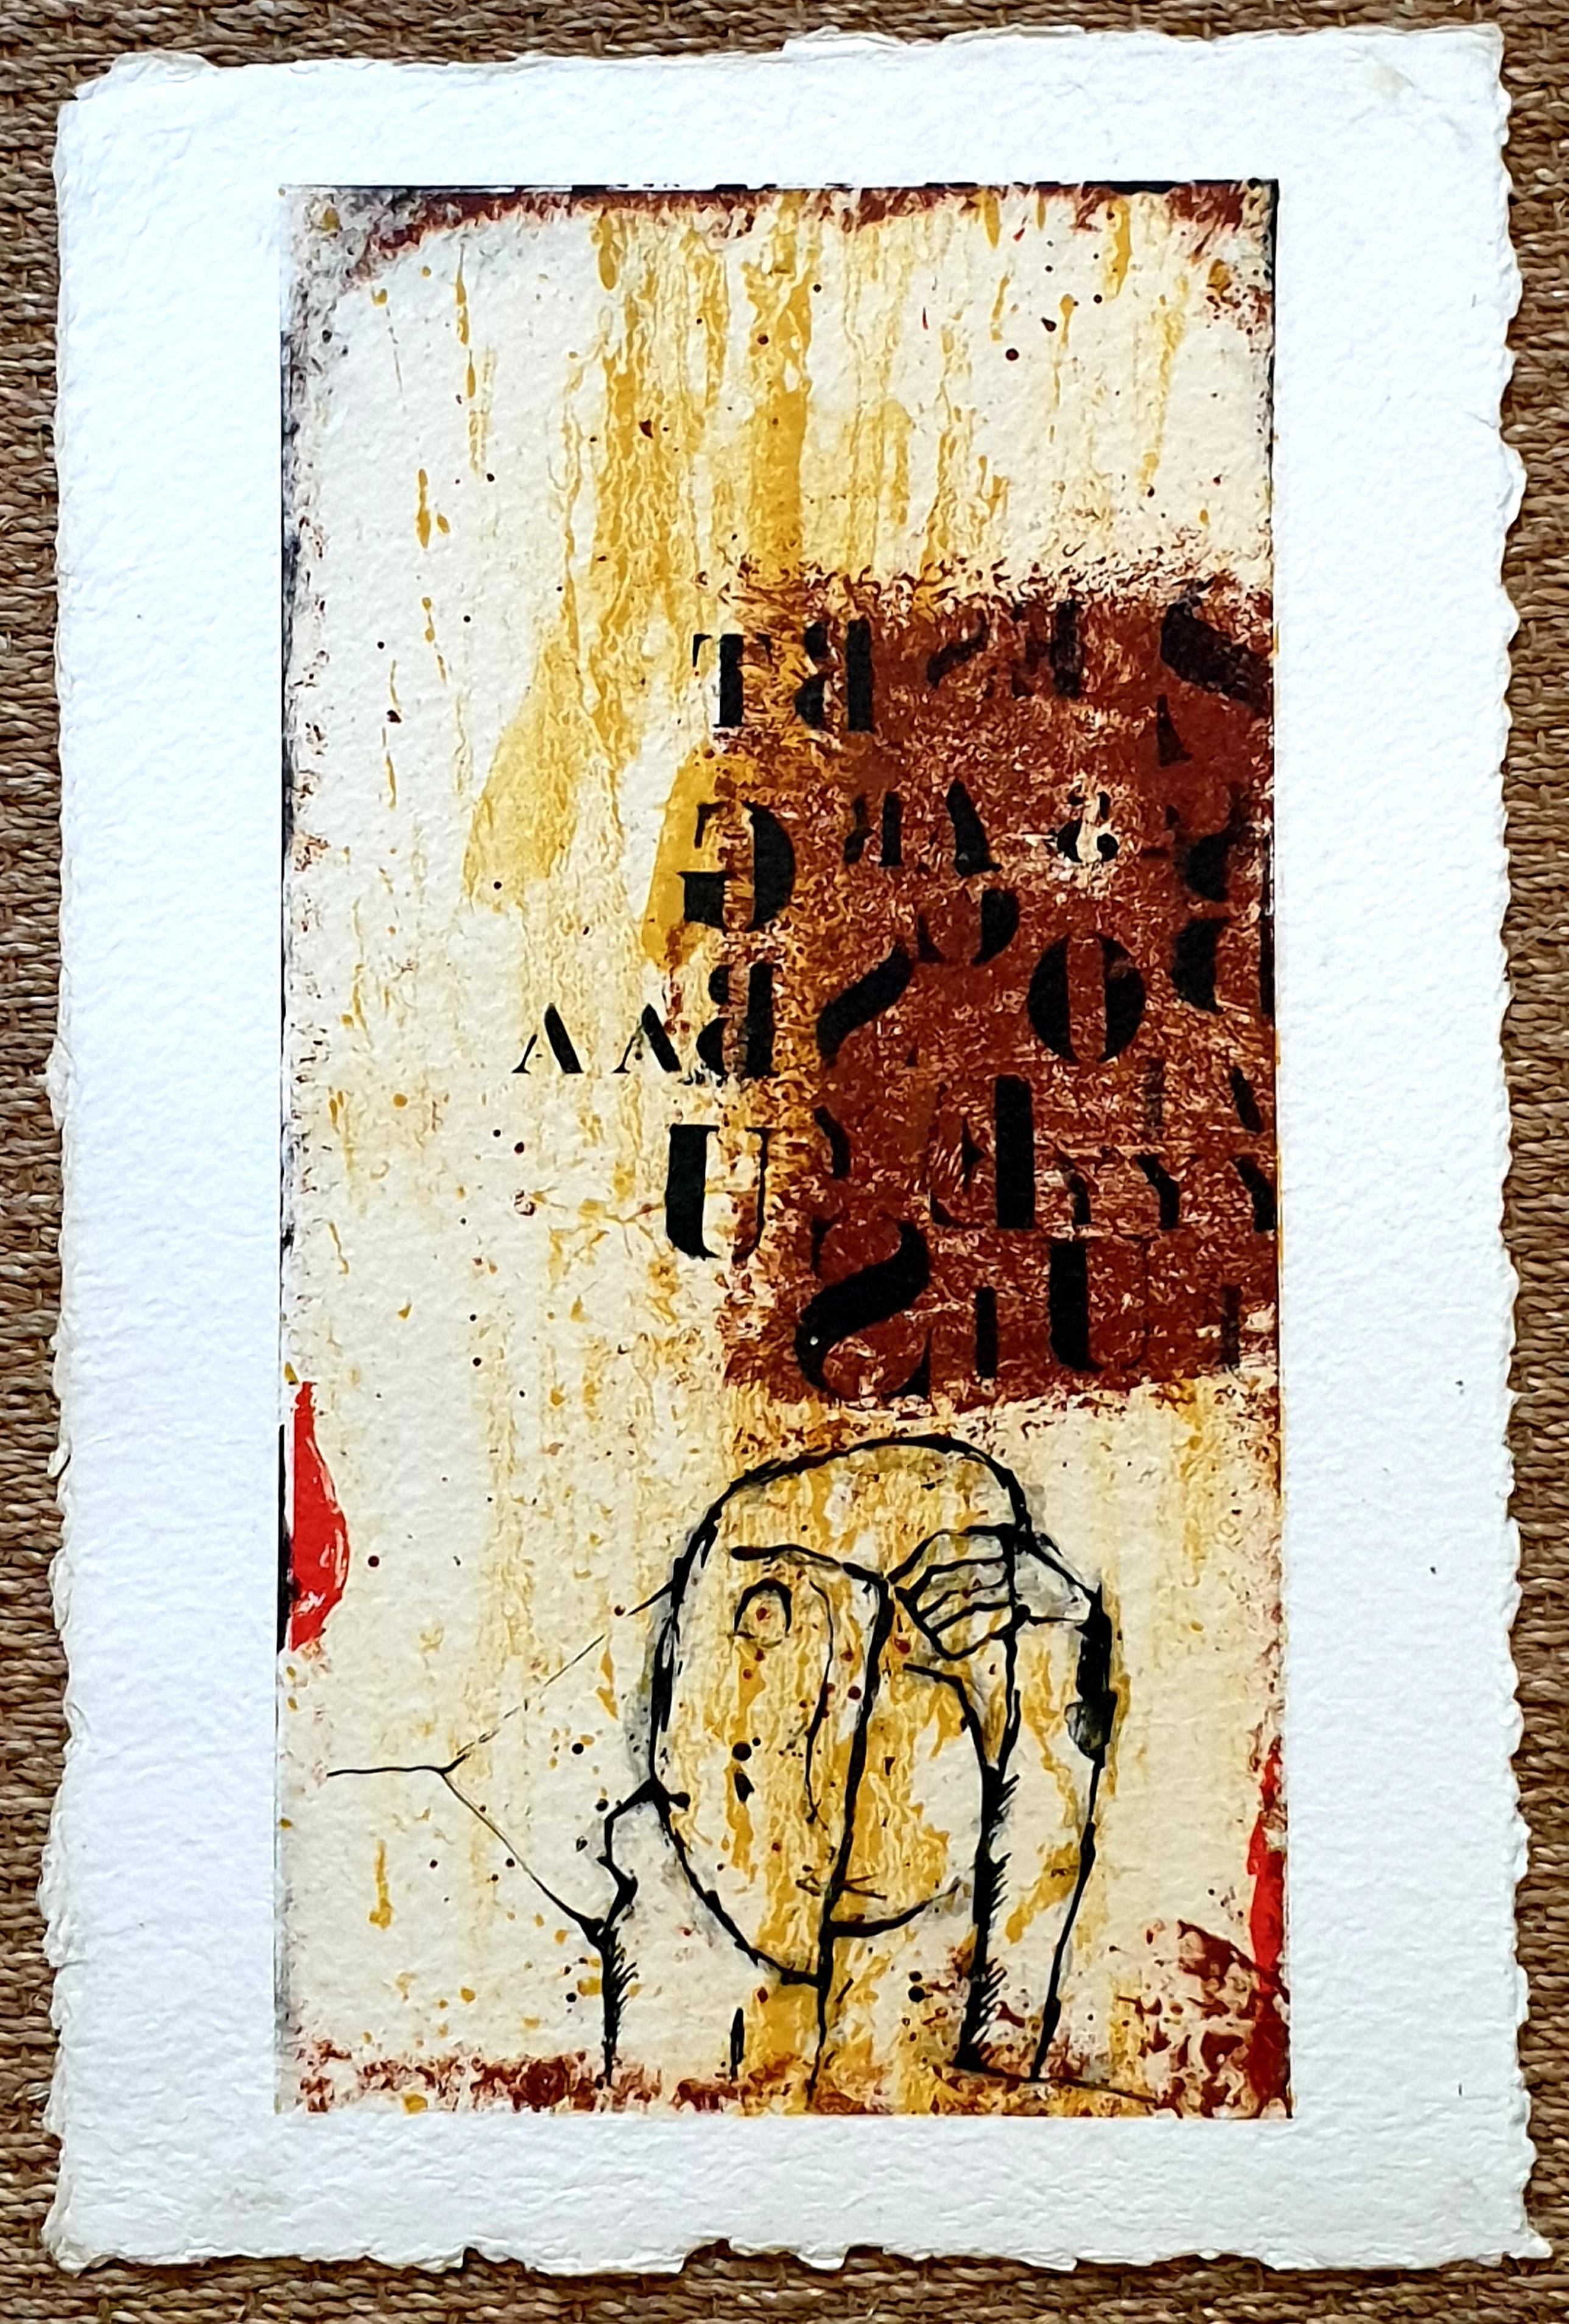 Abstract Expressionist Engraving on Handmade Paper, 'Profile and Letters'. - Print by James Coignard